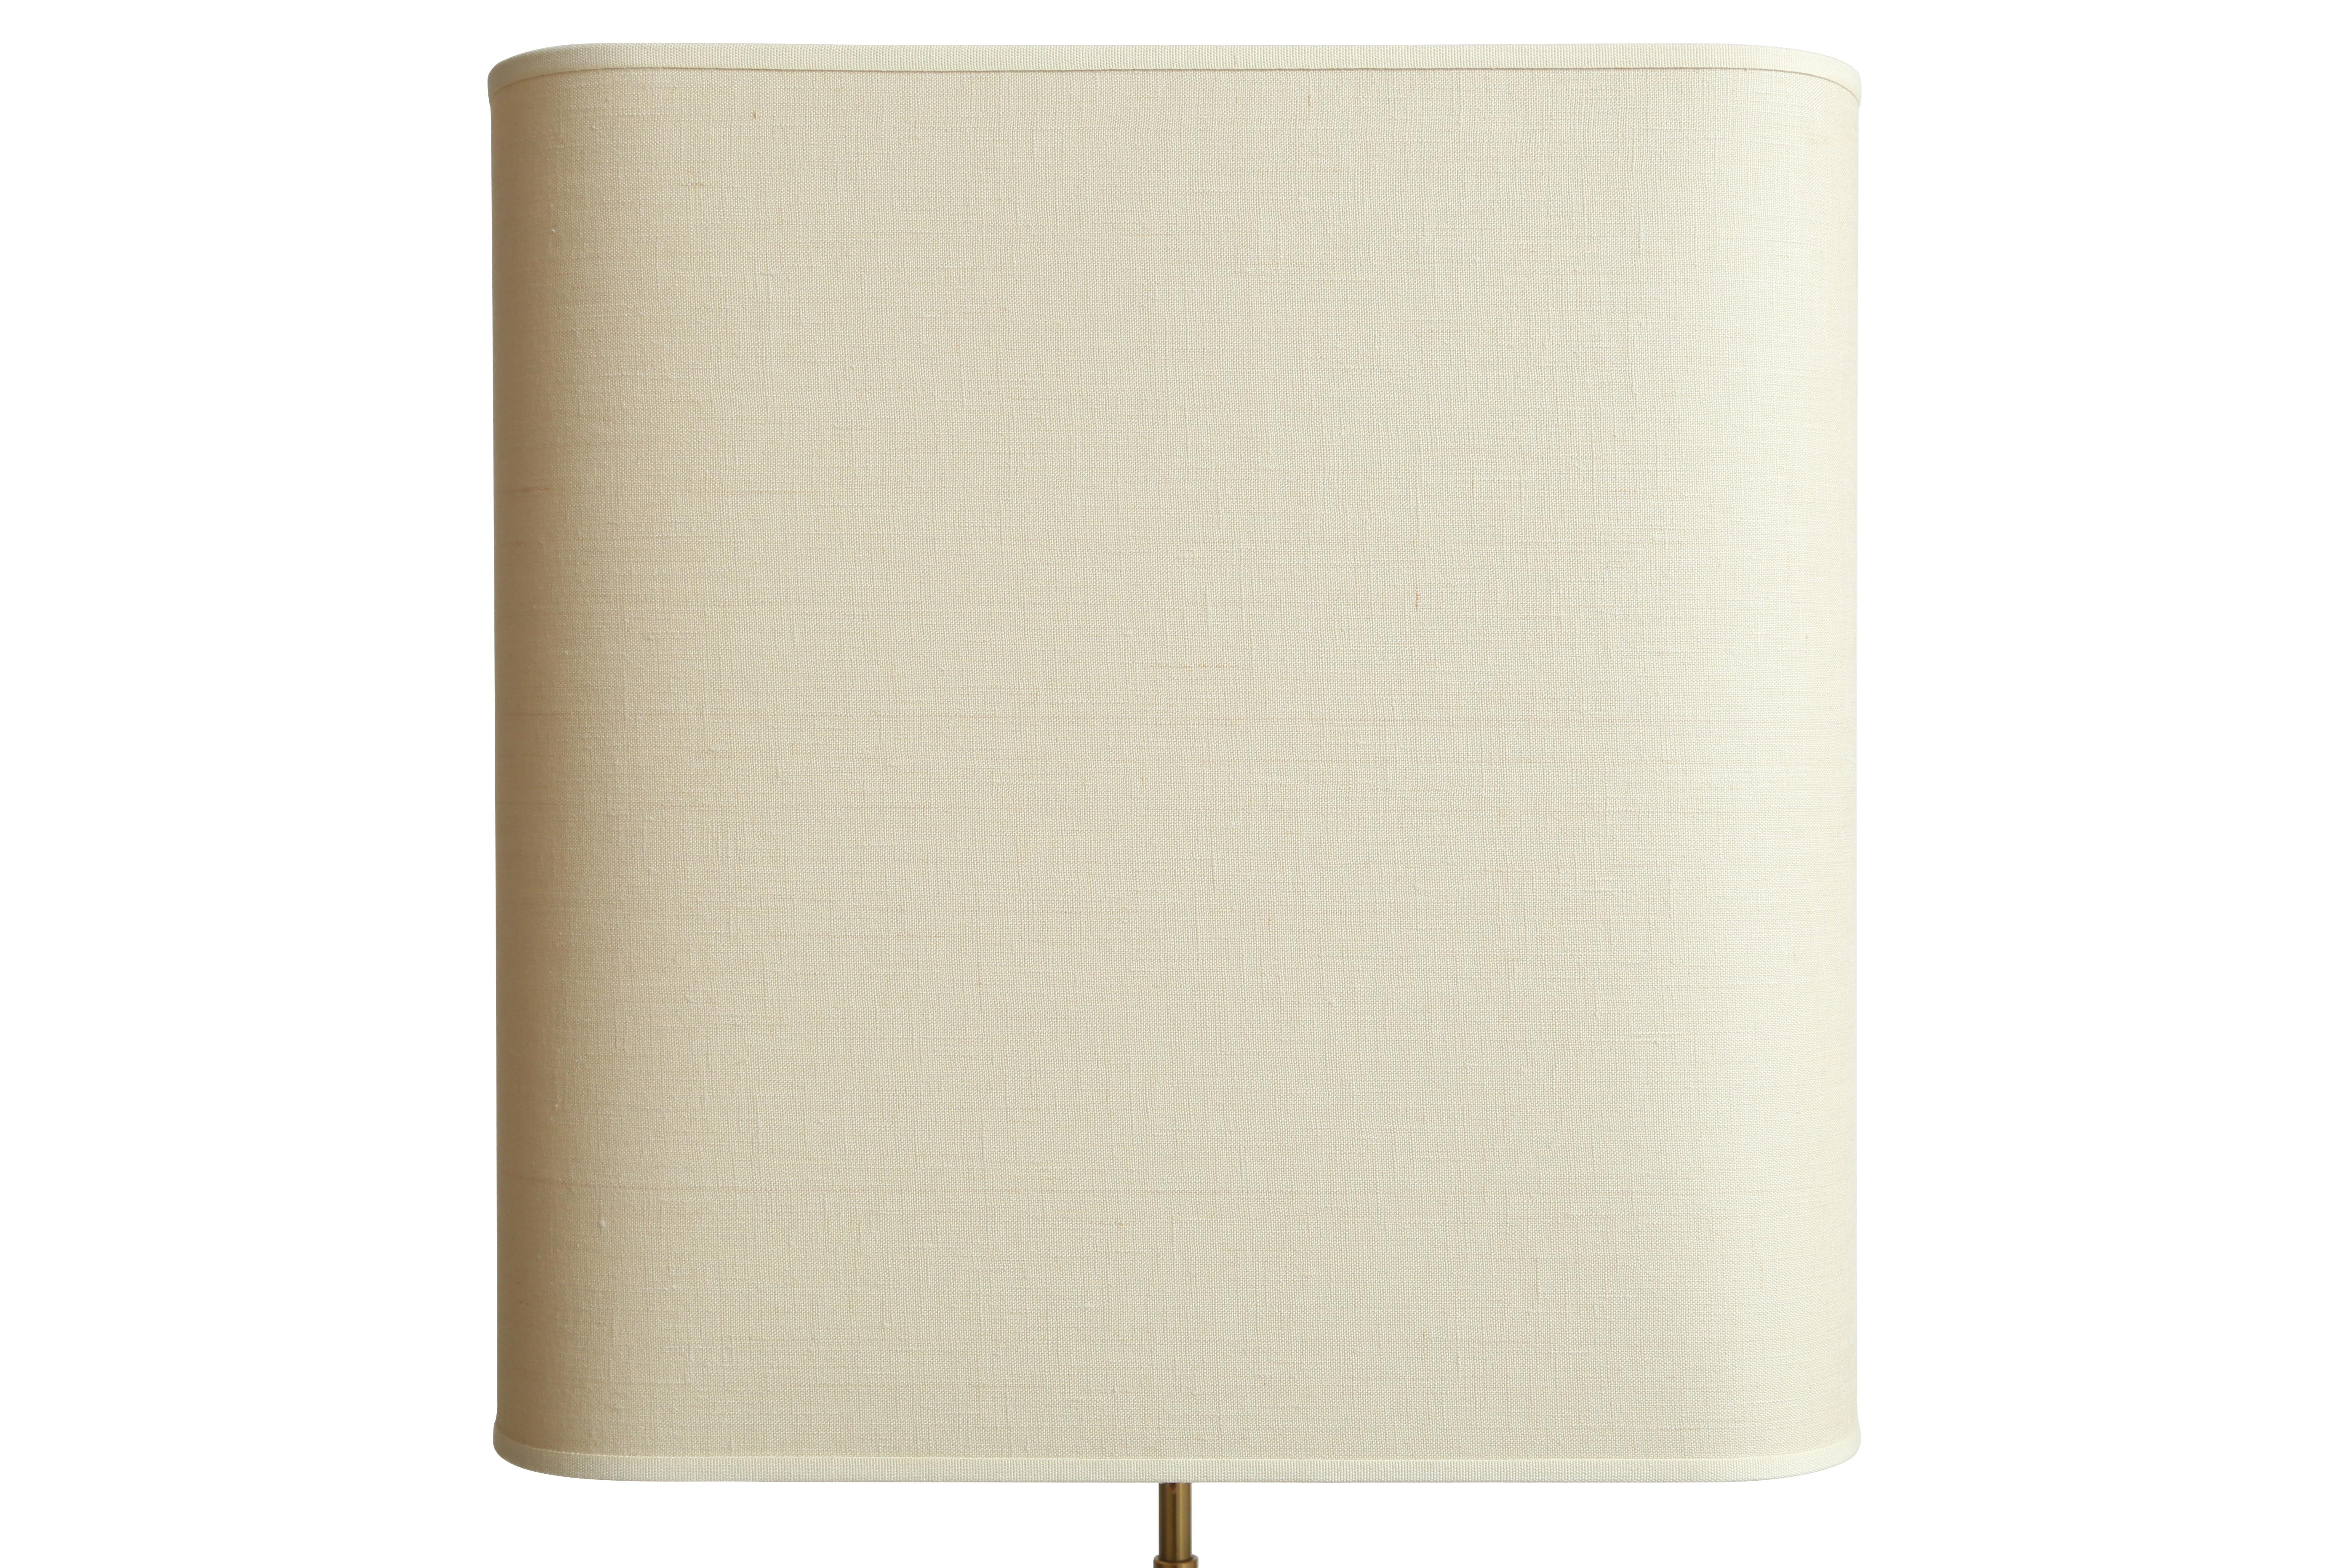 Sogno table lamp with brass base and white fabric lampshade.
Dimensions:
6.5 